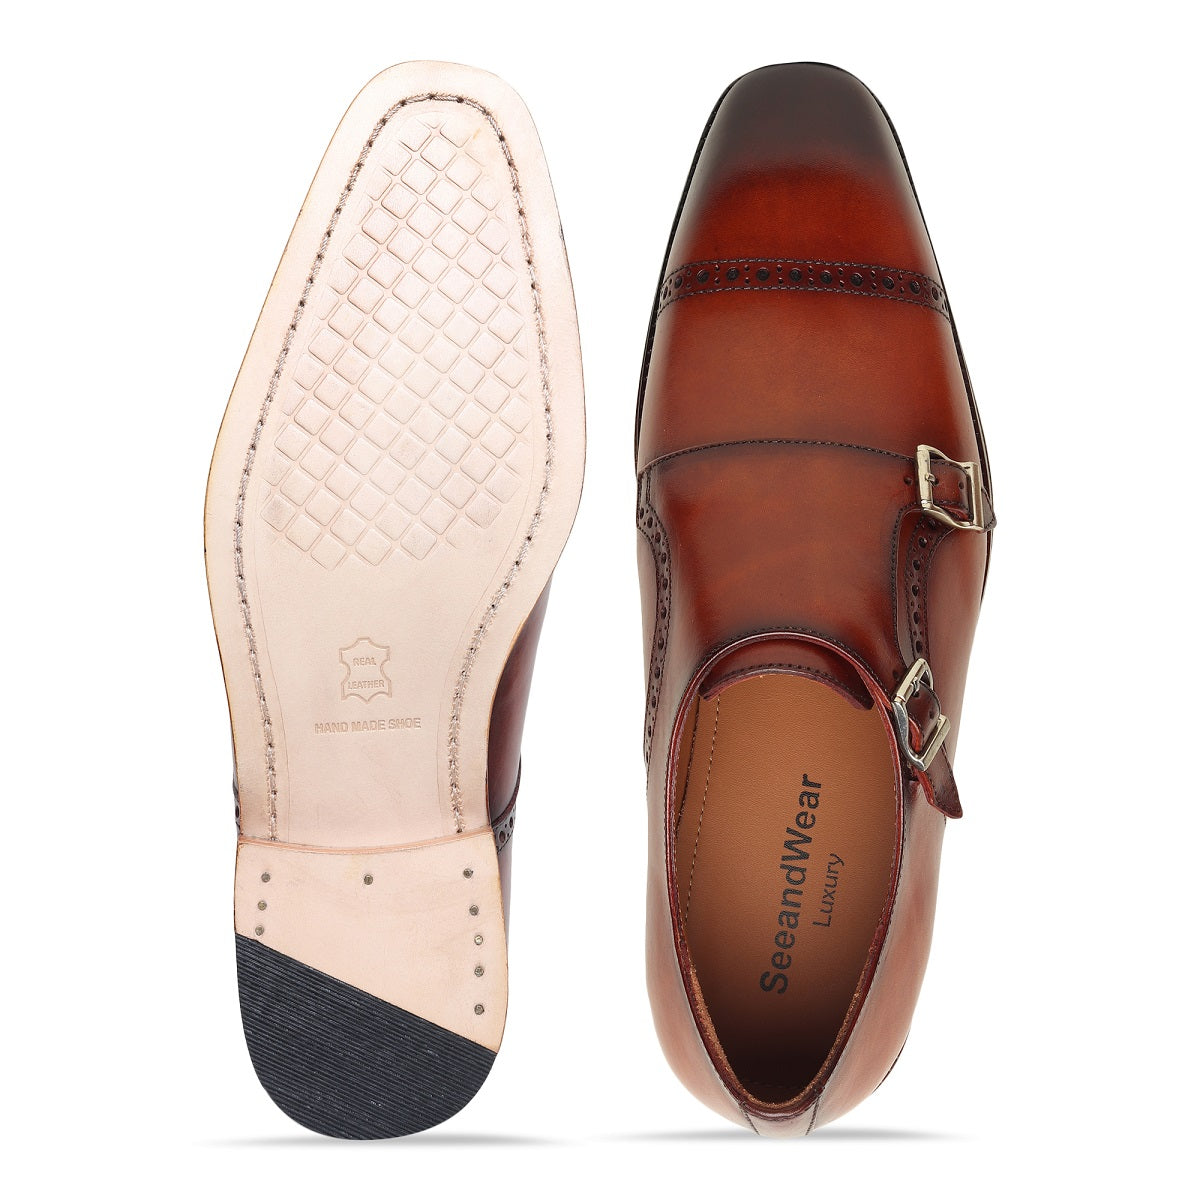 Style Double Monk Strap Handmade Shoes - Clearance